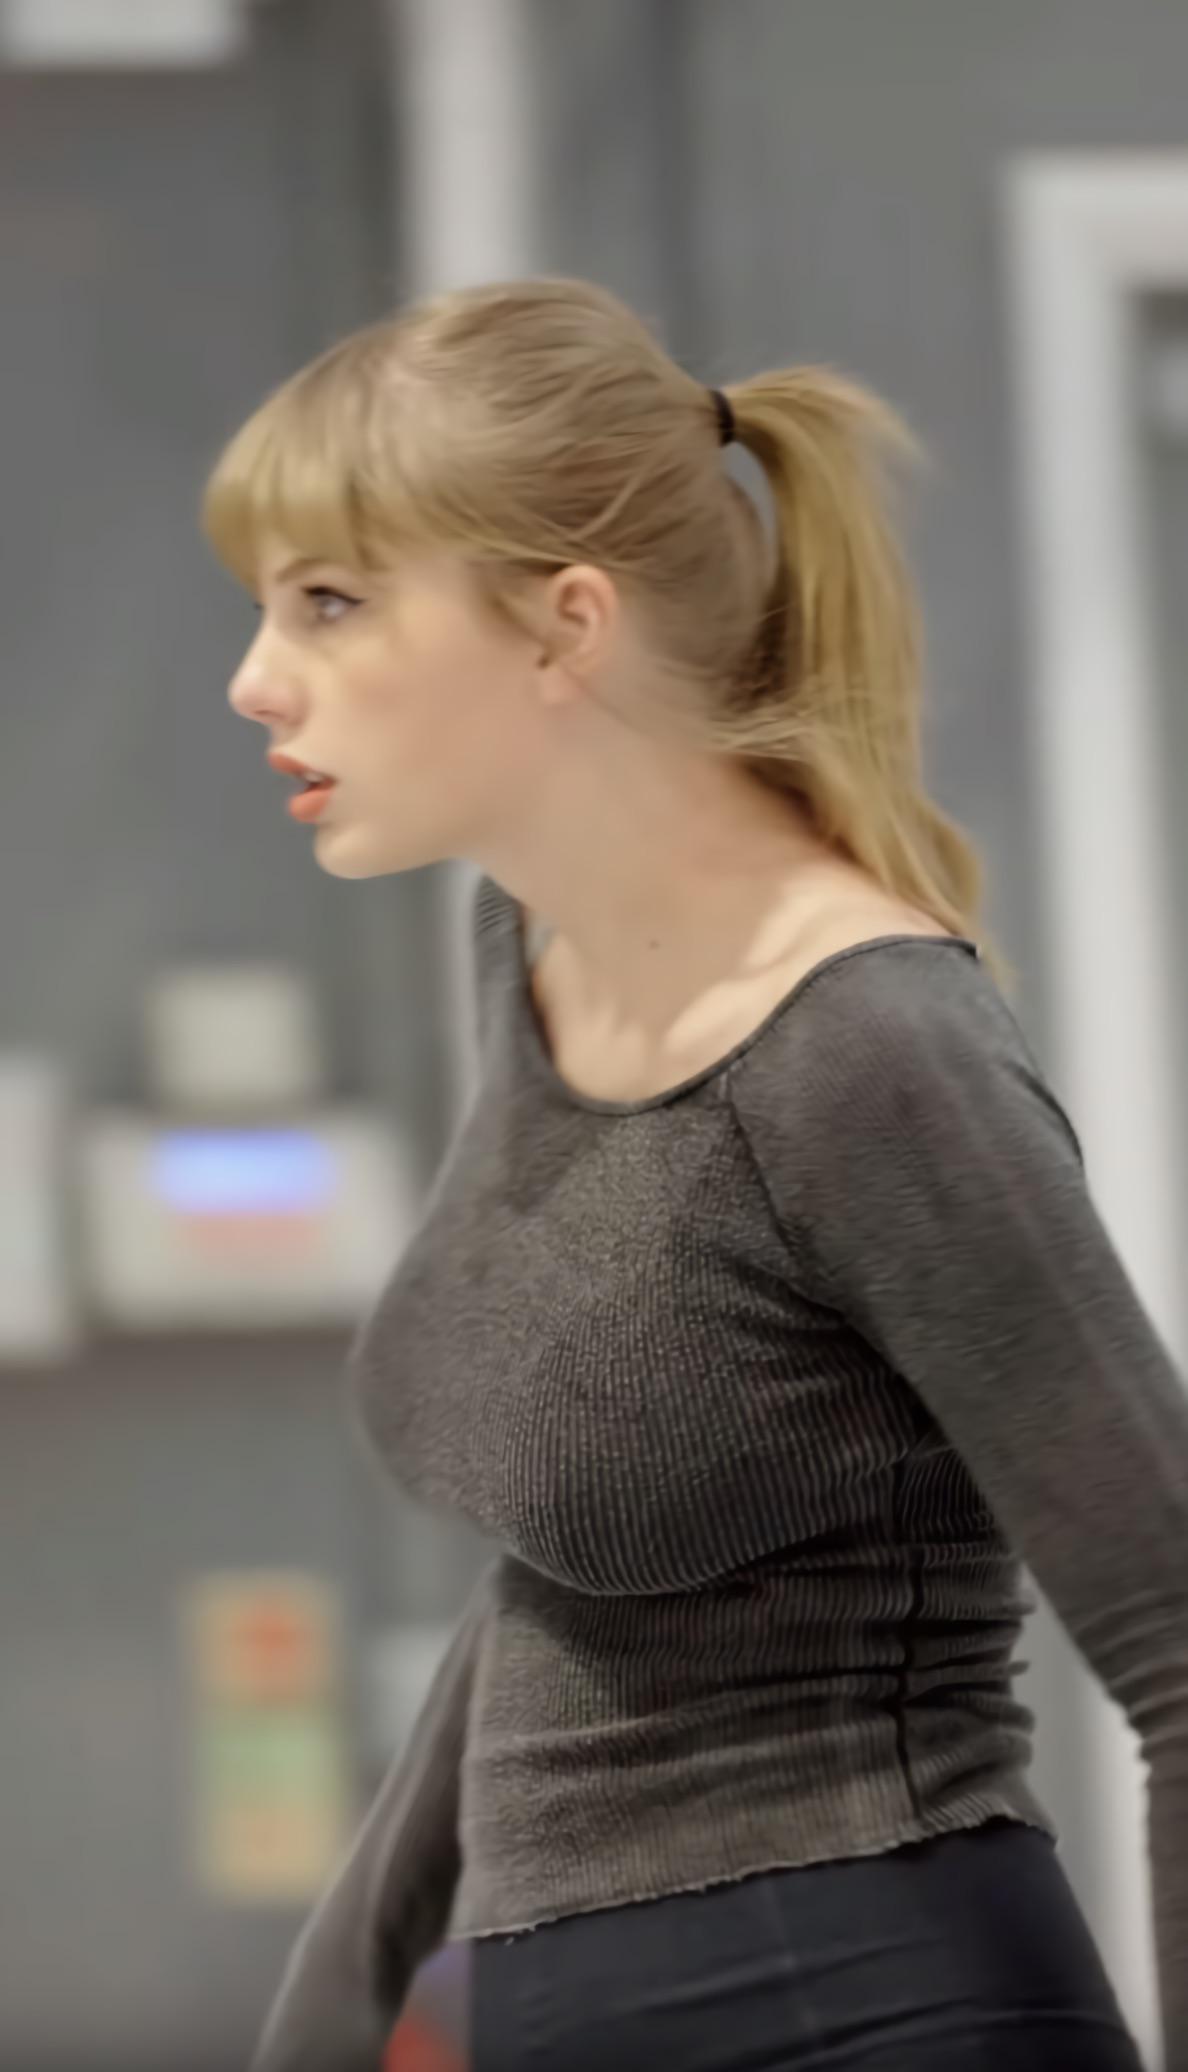 I would love a titjob from busty Taylor Swift